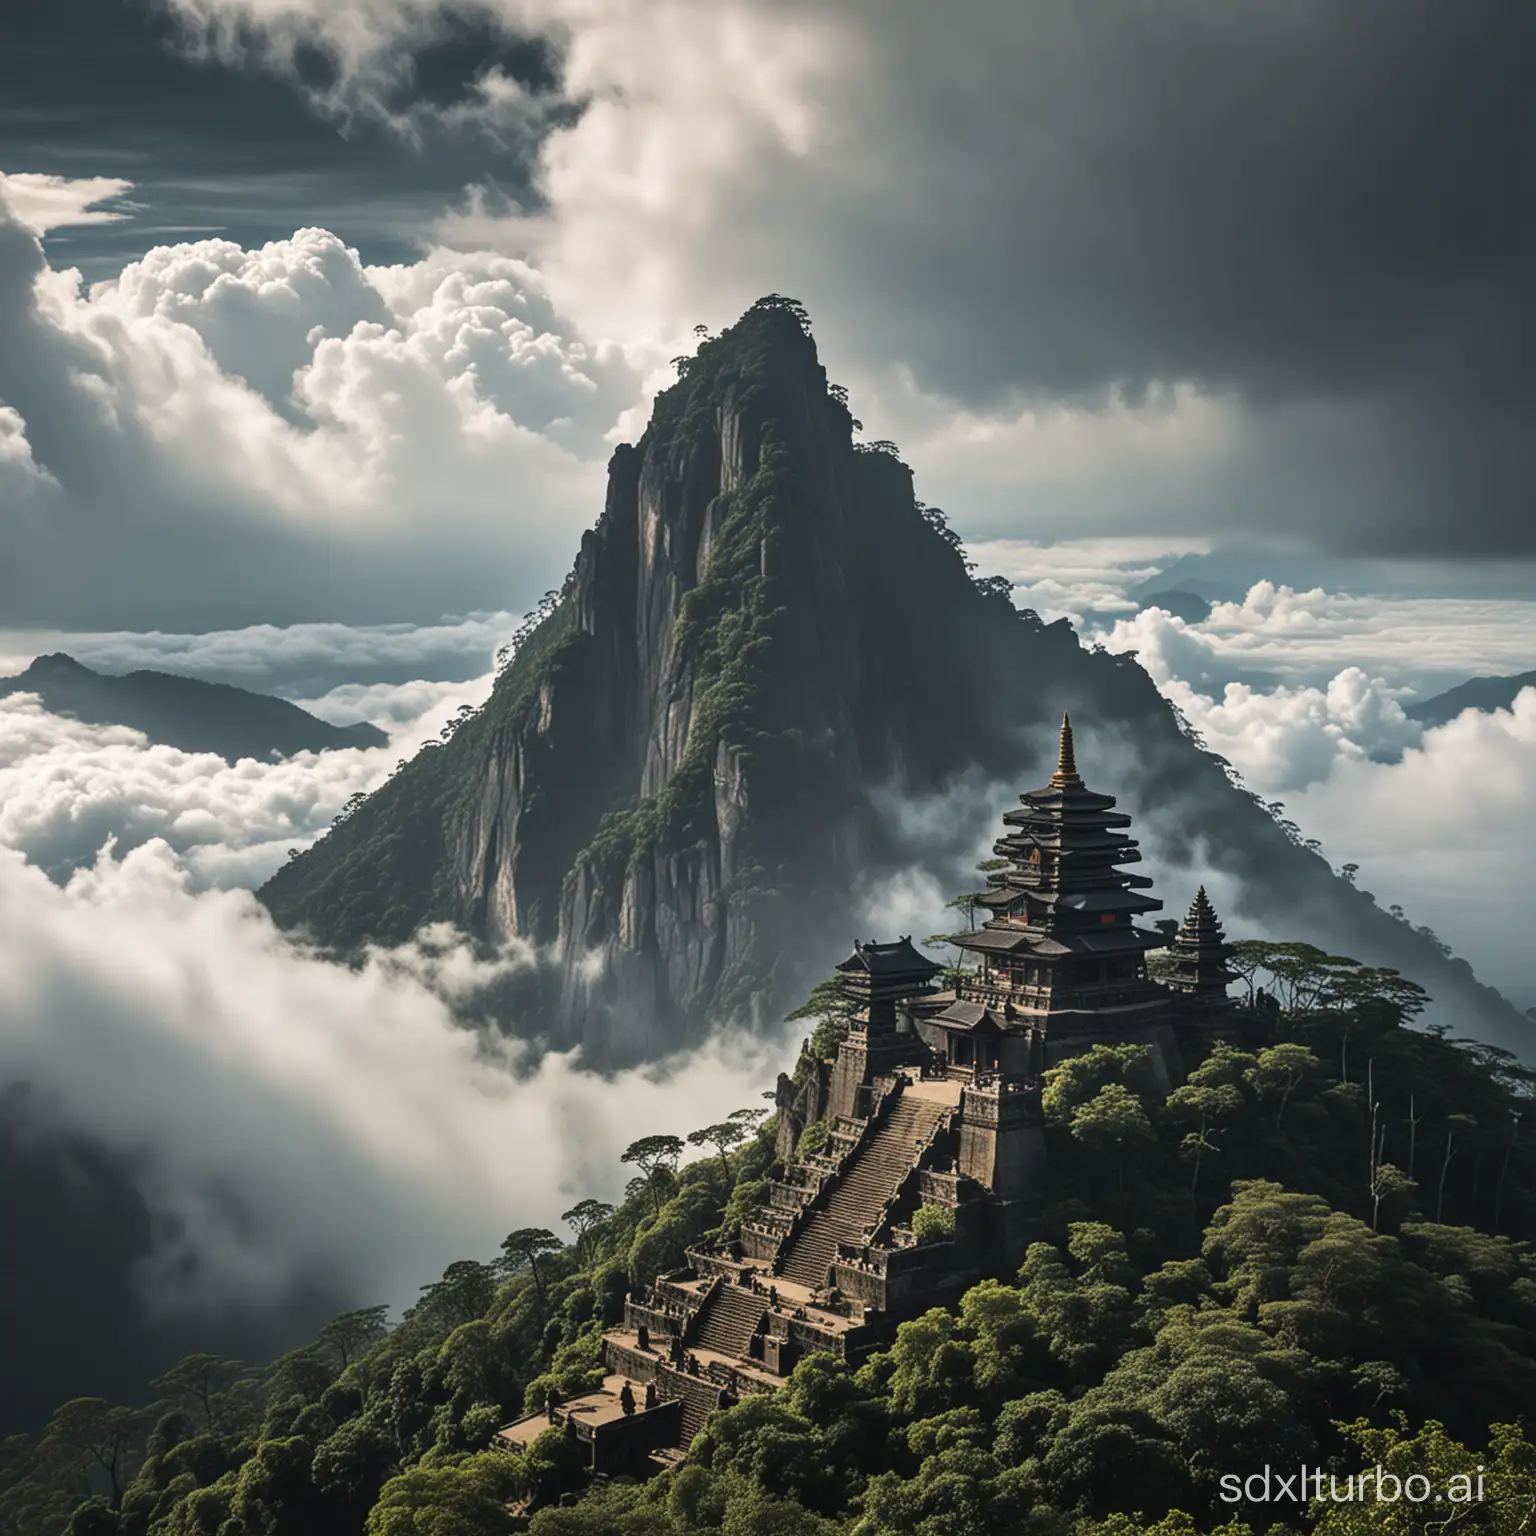 A towering black mountain range reaching into the clouds, with an ancient stone temple at its summit.